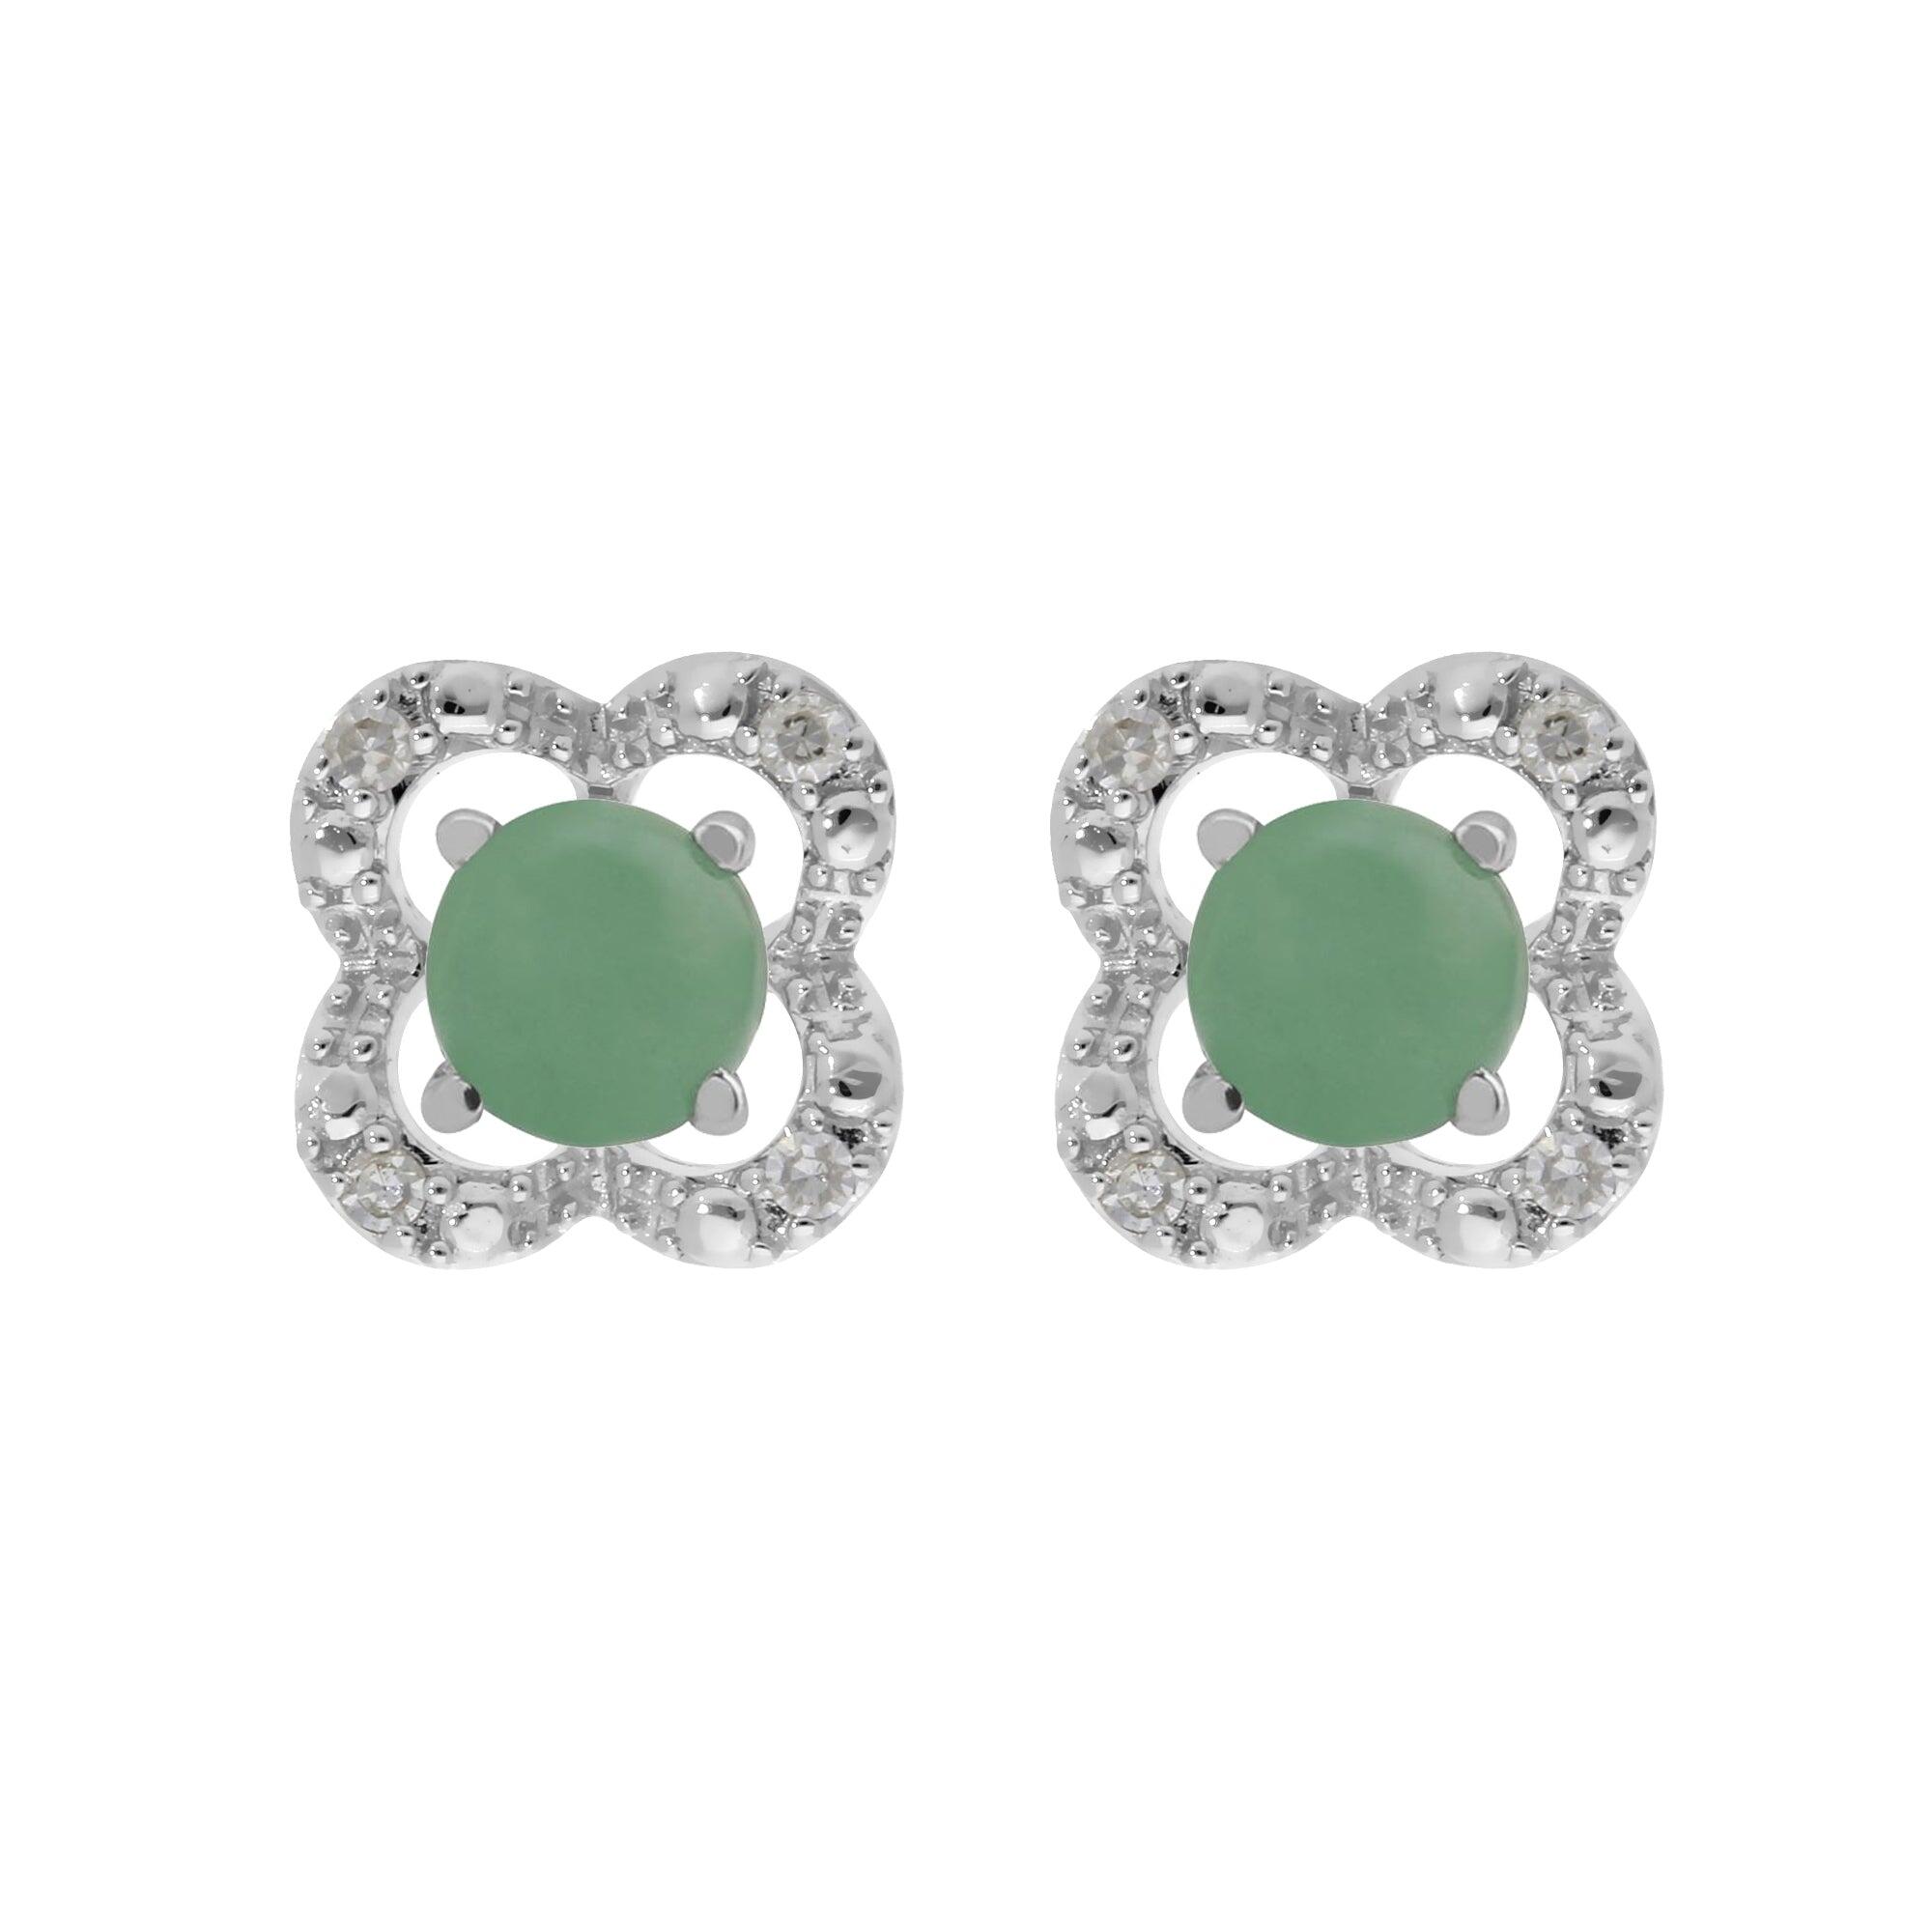 Classic Round Jade Stud Earrings with Detachable Diamond Flower Ear Jacket in 9ct White Gold